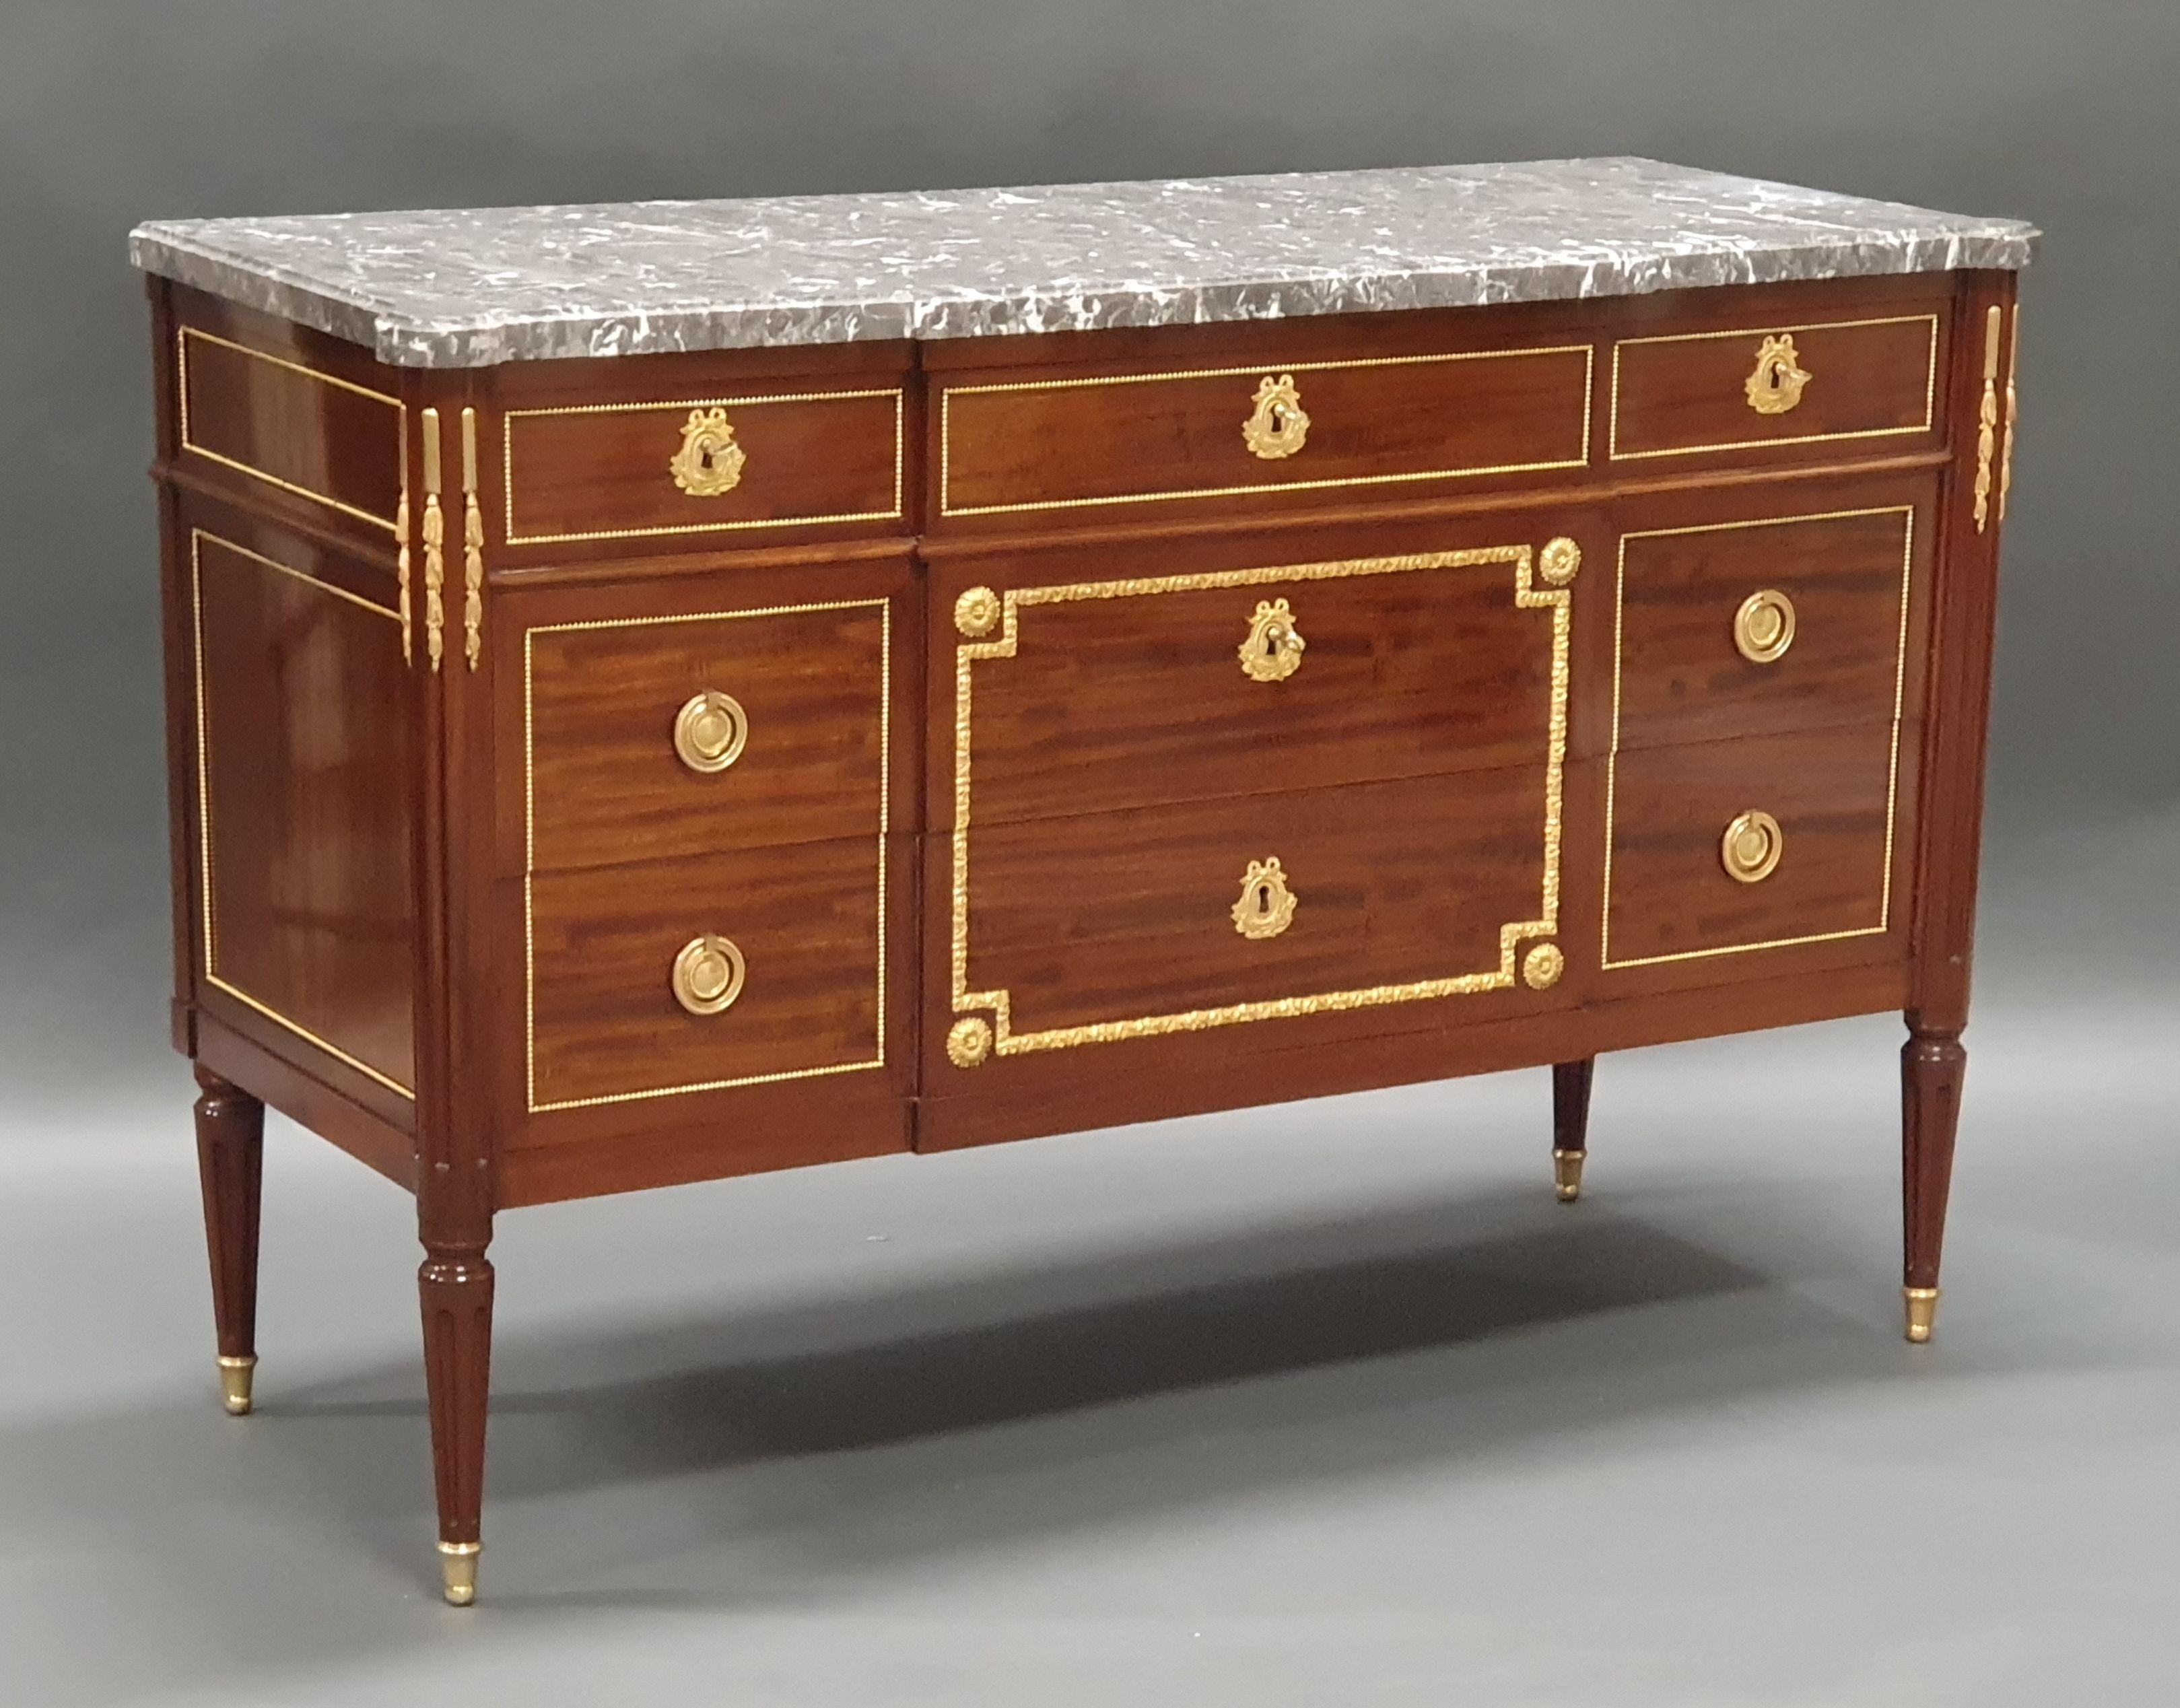 Large Louis XVI Commode in mahogany veneer and rich ornamentation of very finely chiseled gilt bronze, opening five drawers in three rows, central projection and rounded fluted front uprights.

Thick molded Saint Anne gray marble top.

From a